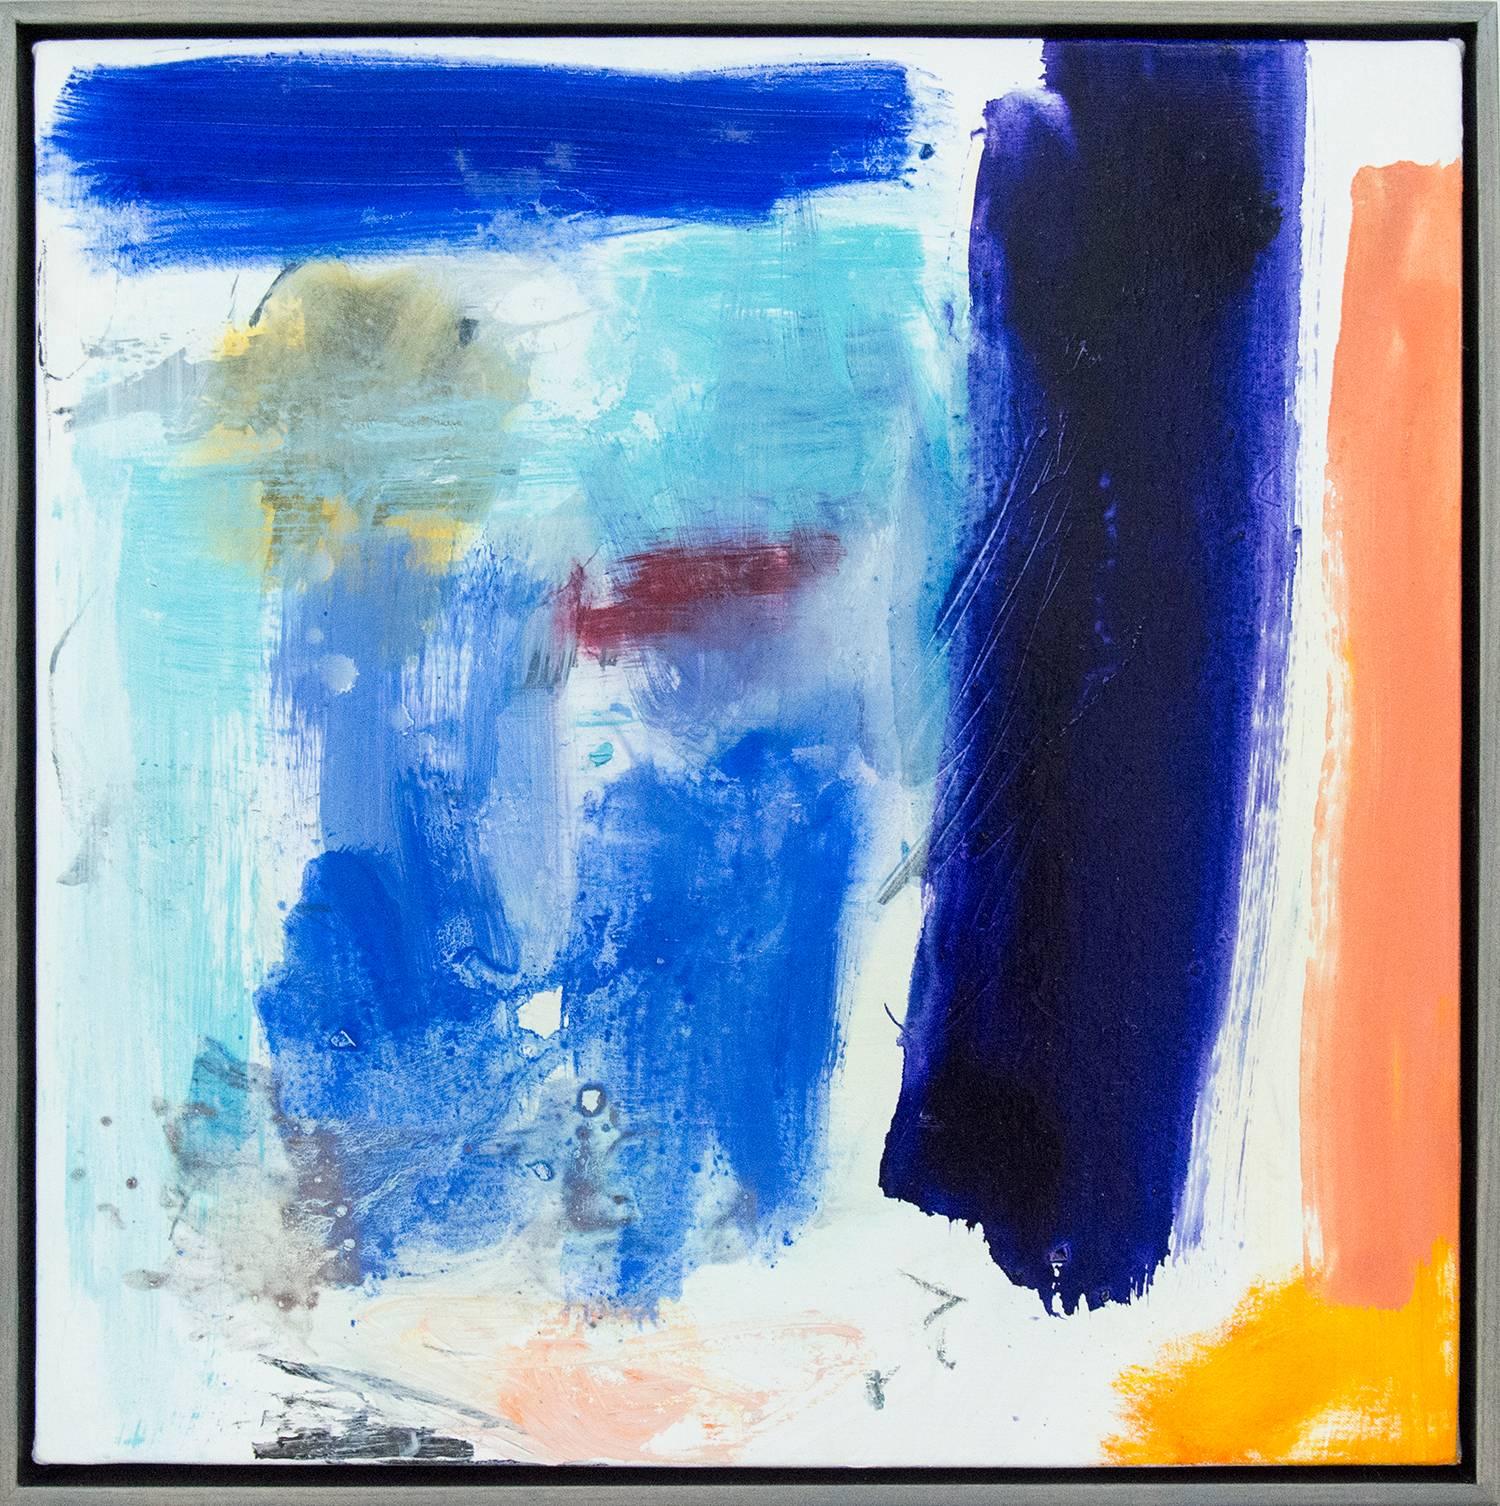 Scott Pattinson Abstract Painting - Ouvert No 53 - vibrant, colourful, gestural abstraction, oil on square canvas